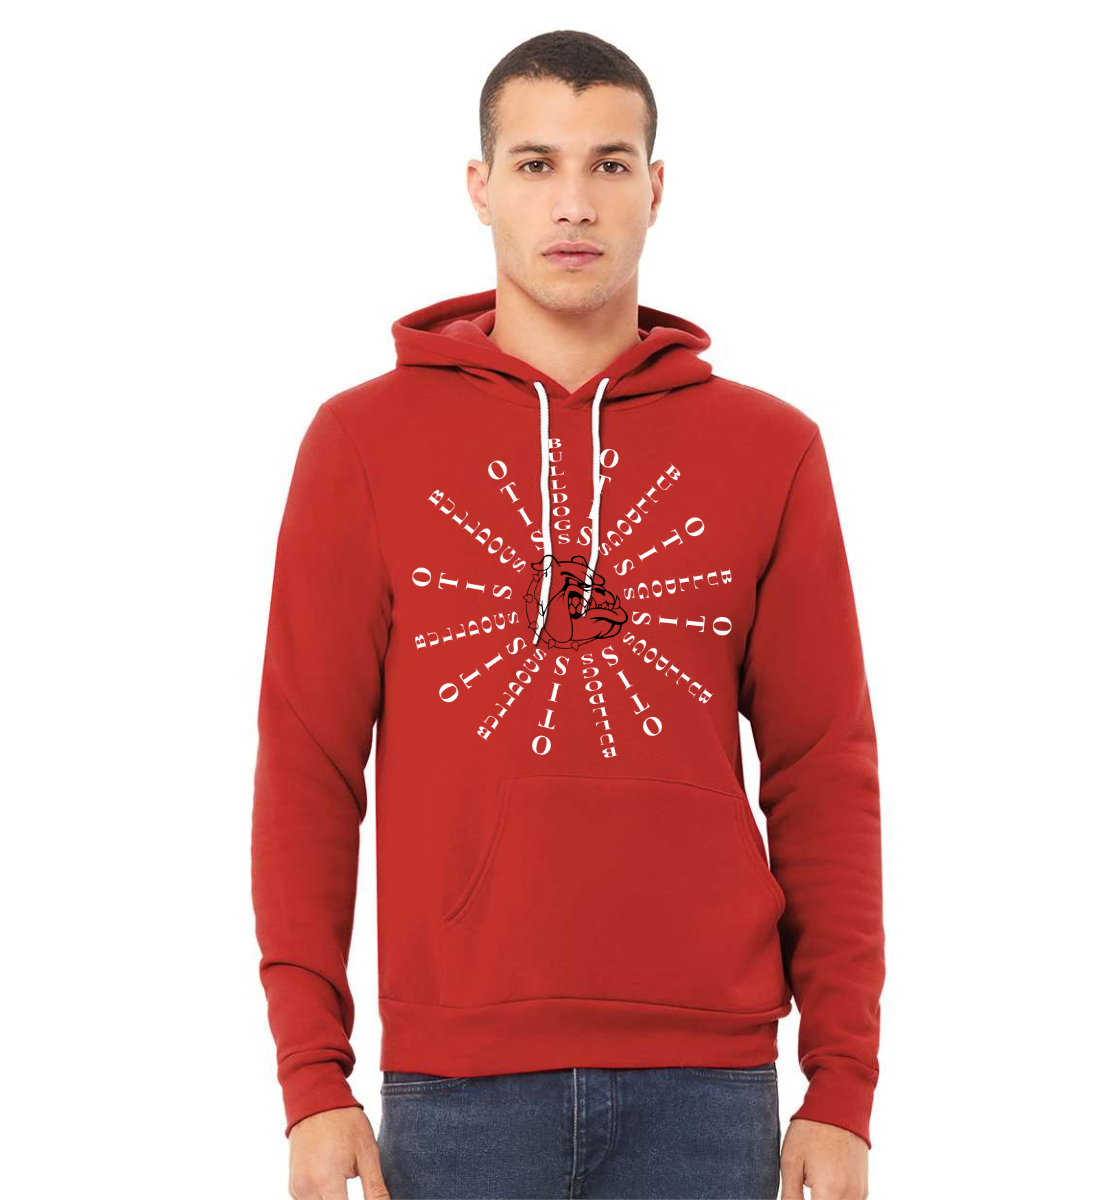 otis bulldogs hoodie - unisex - elevate your spirit with two designs!